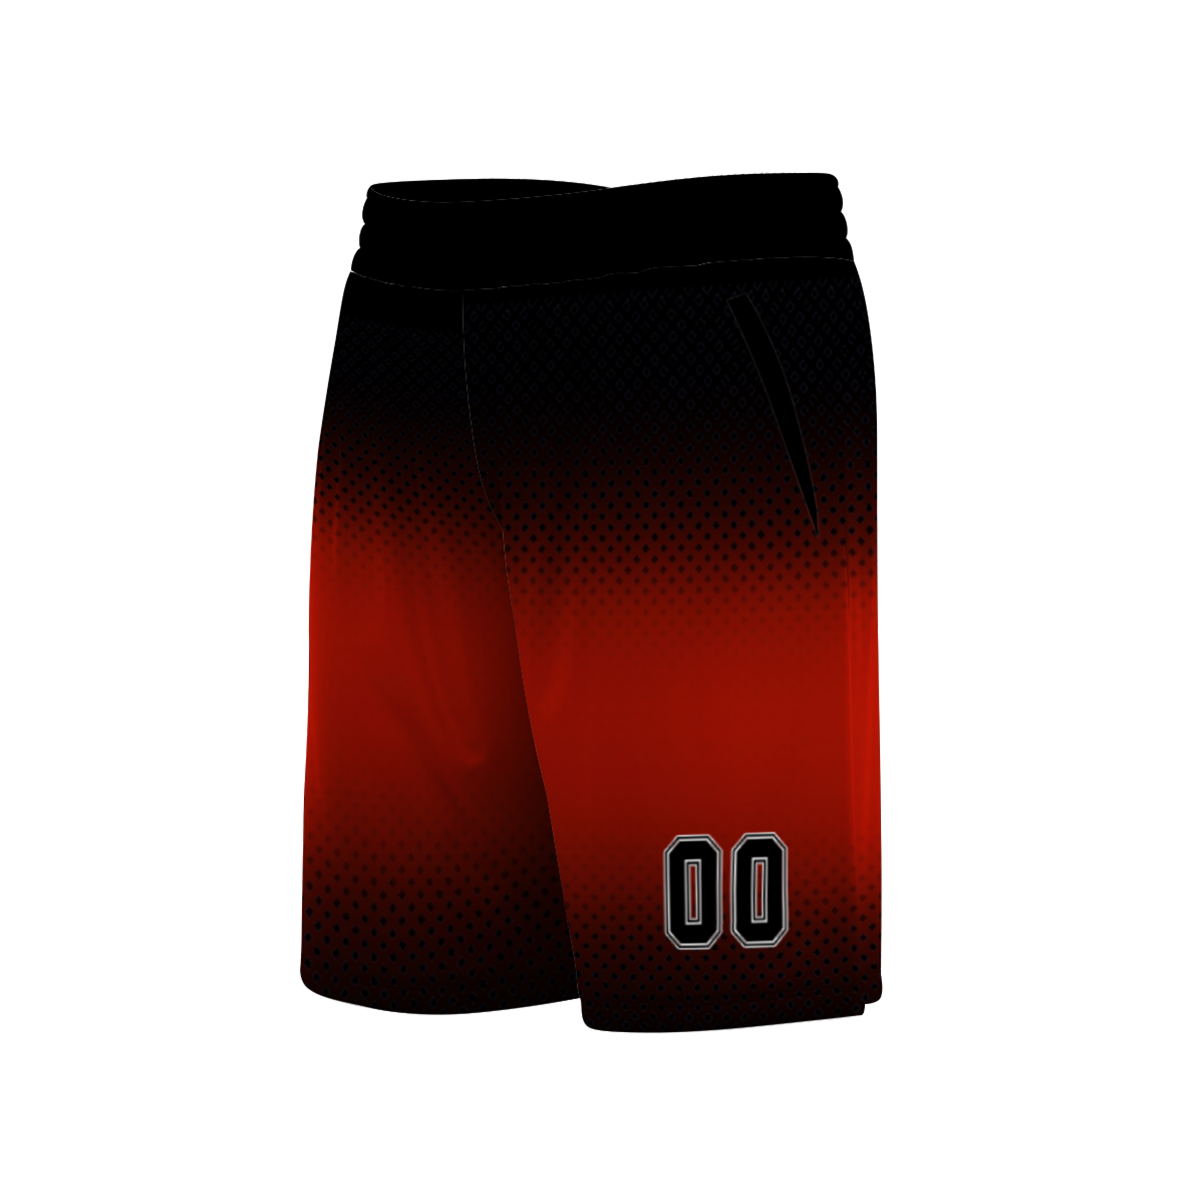 customize-basketball-team-wear-suits-print-on-demand-sublimation-breathable-basketball-jersey-uniforms-at-cj-pod-8